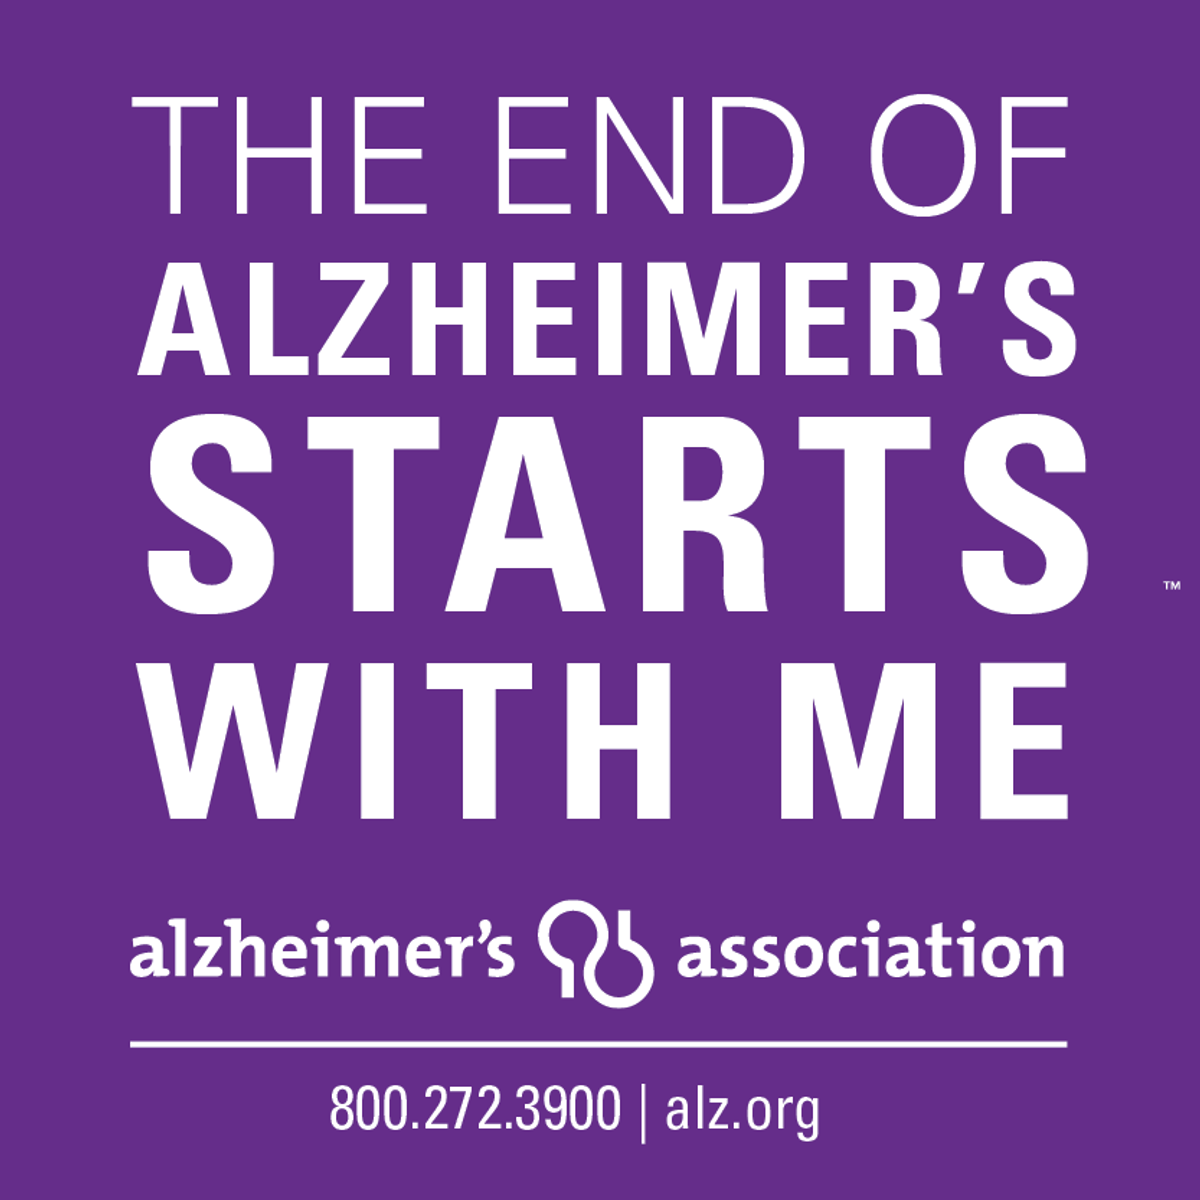 Join The Fight To End Alzheimer's